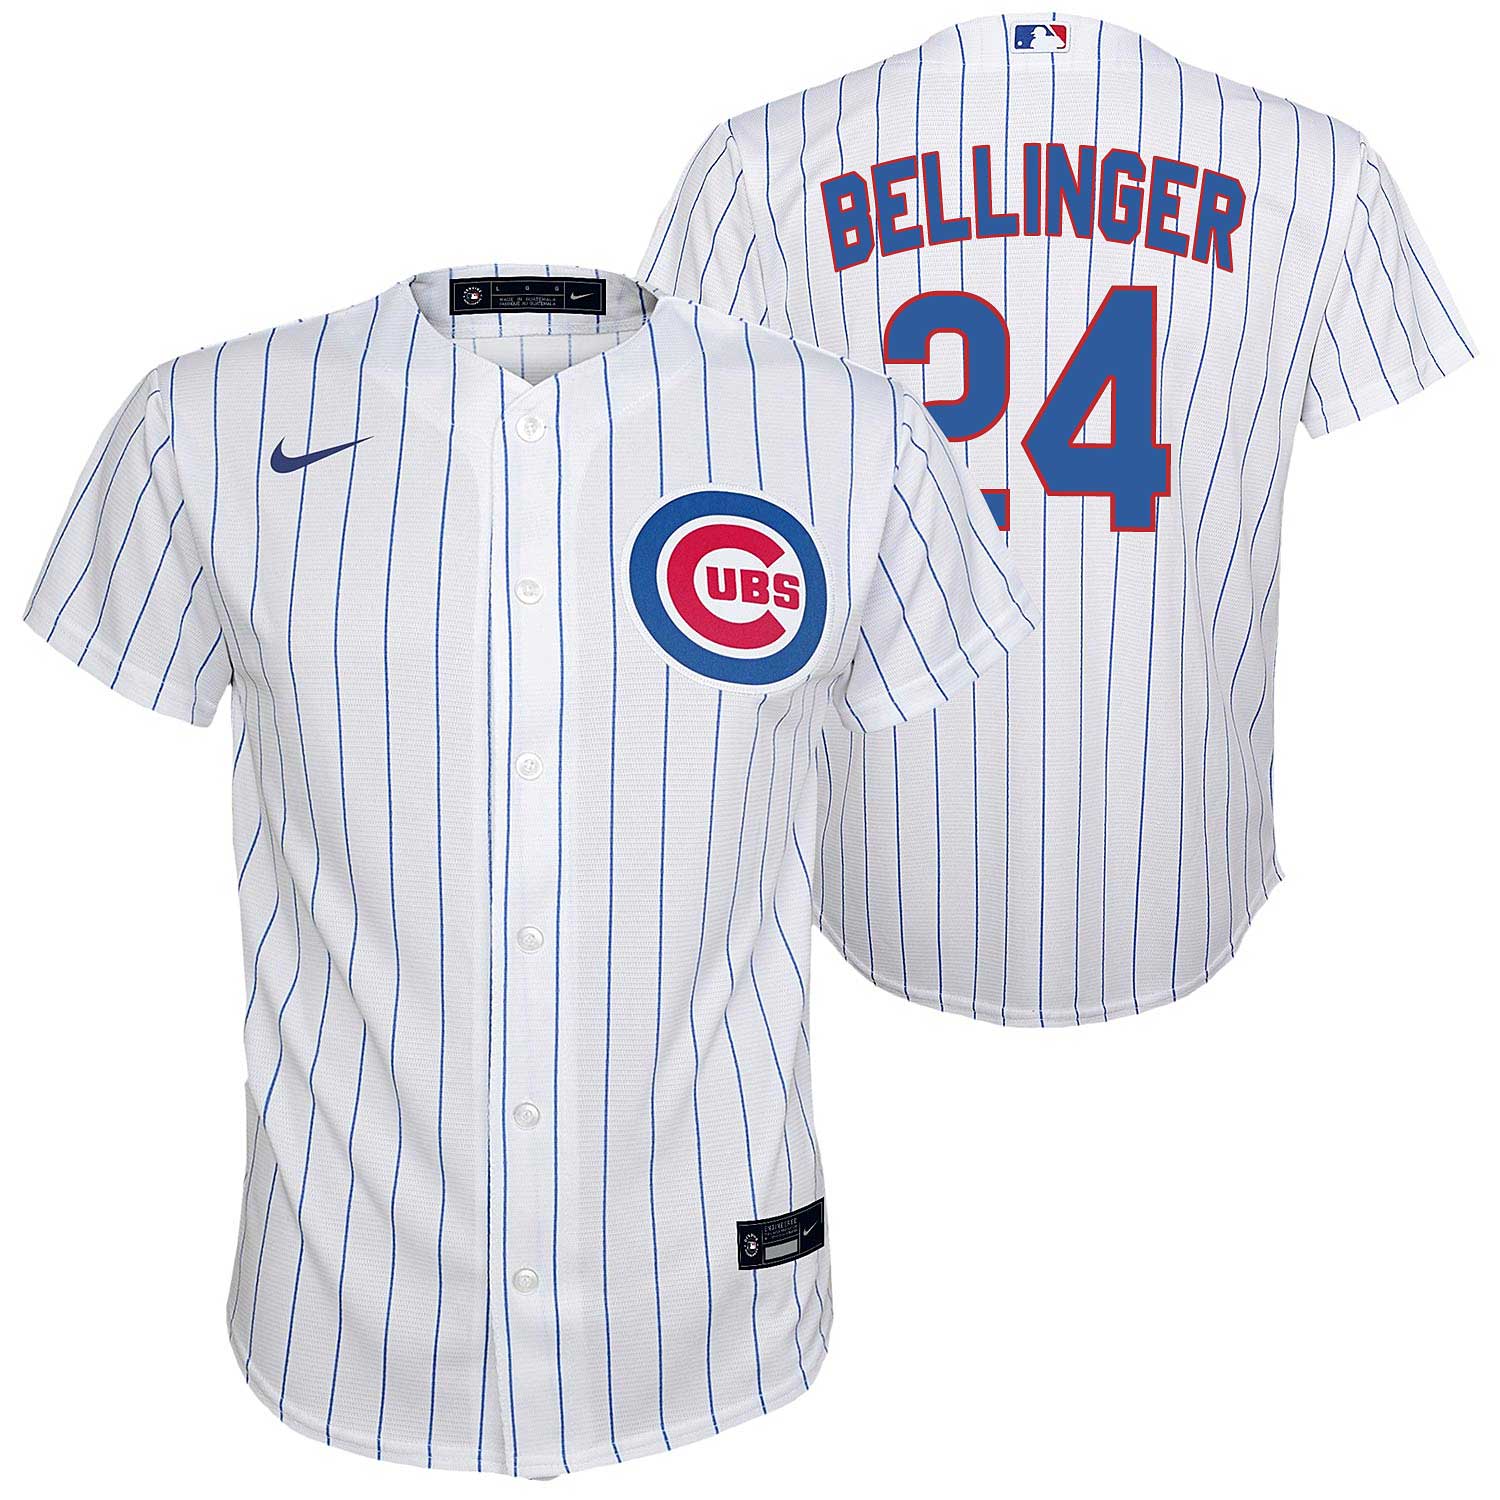 Chicago Cubs Cody Bellinger Youth Nike Home Replica Jersey with Authentic Lettering Small = 6-8